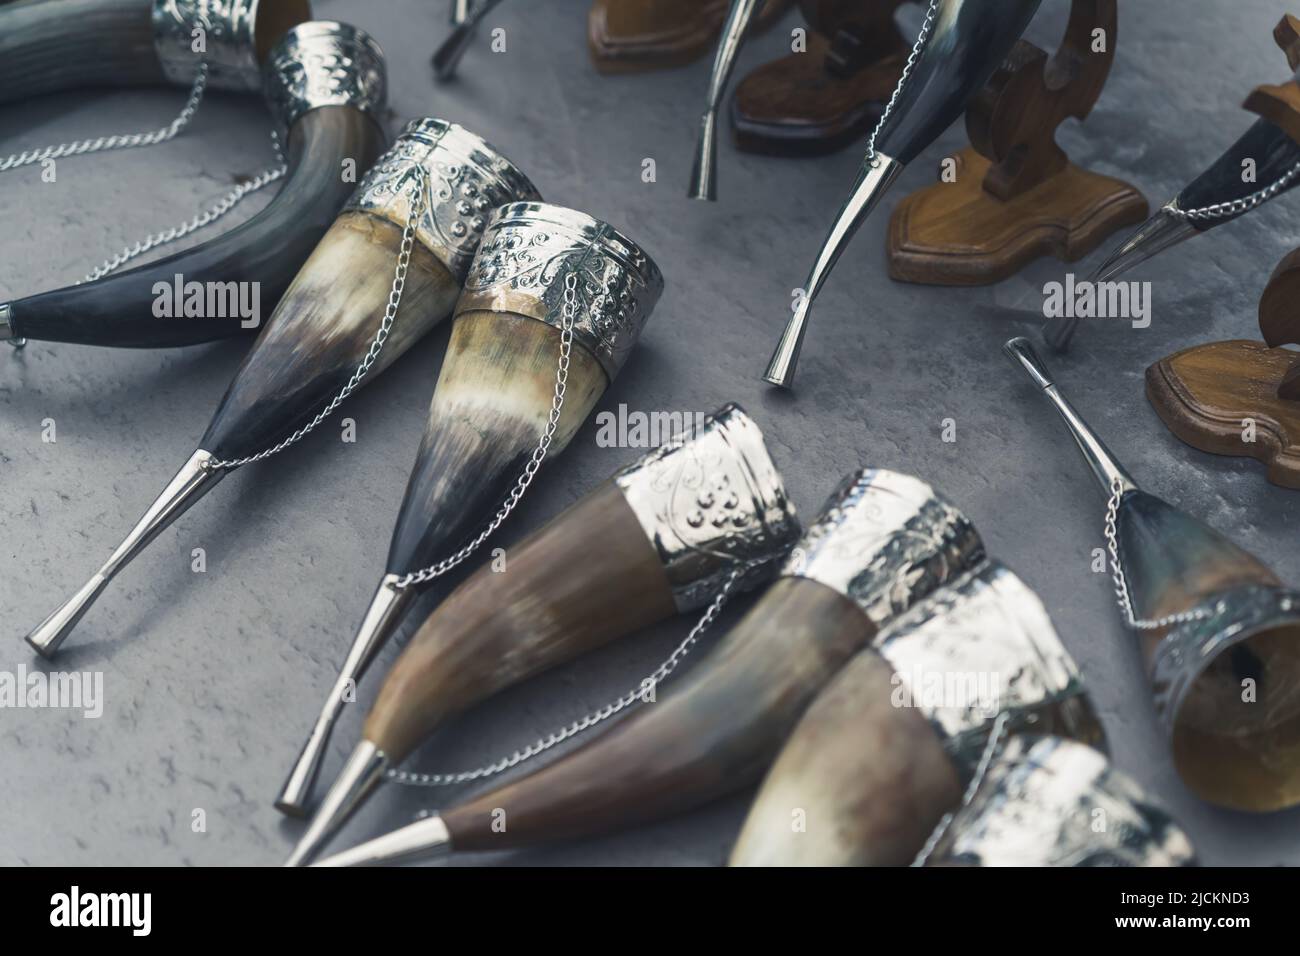 Georgian traditional drinking horns used for wine called Kantsi displayed at the flea market in Tbilisi, Georgia. High quality photo Stock Photo